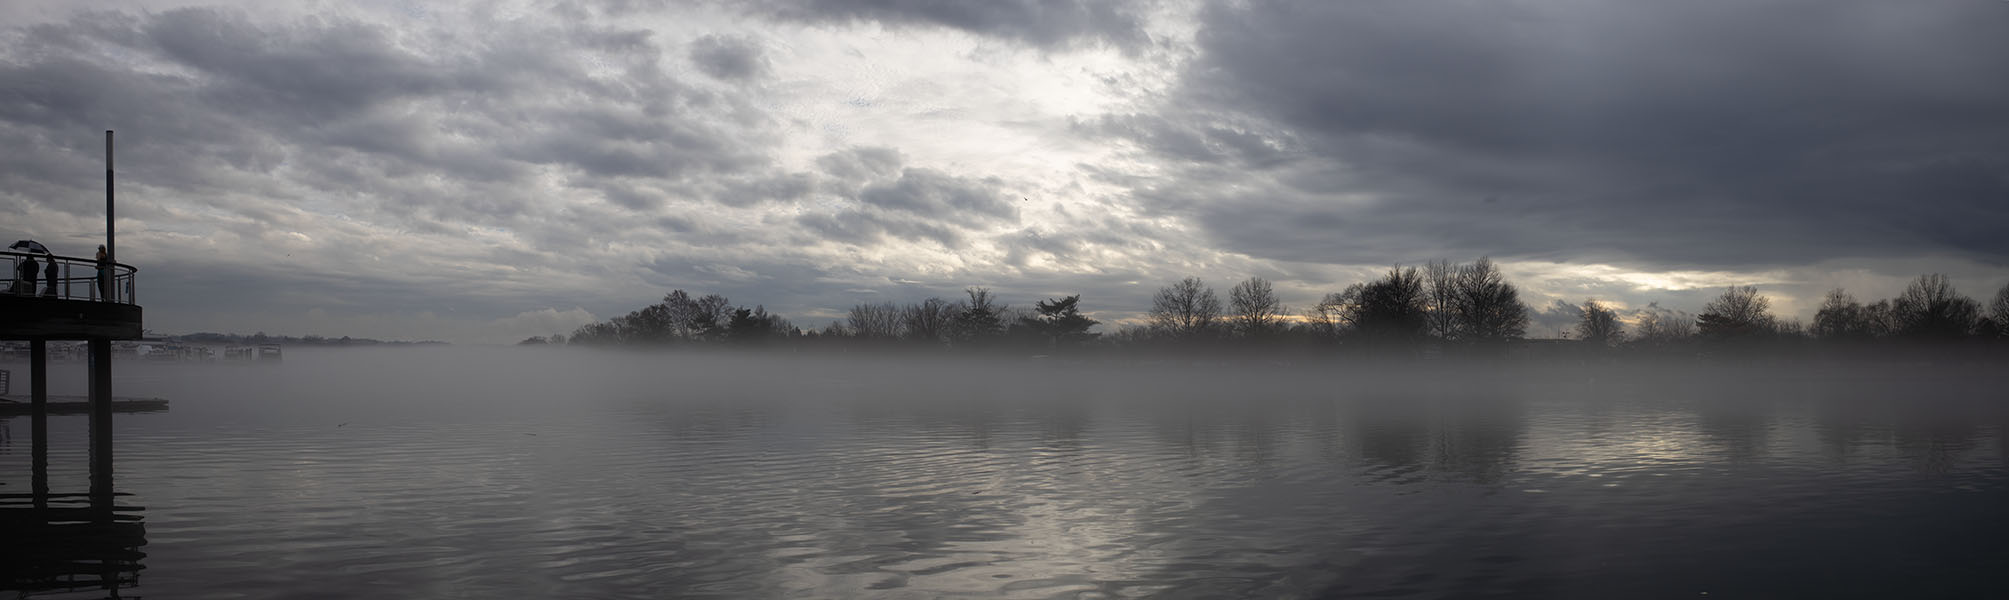 Layer of Fog on a Wintry Body of Water, With Dock to Left and Trees Across.